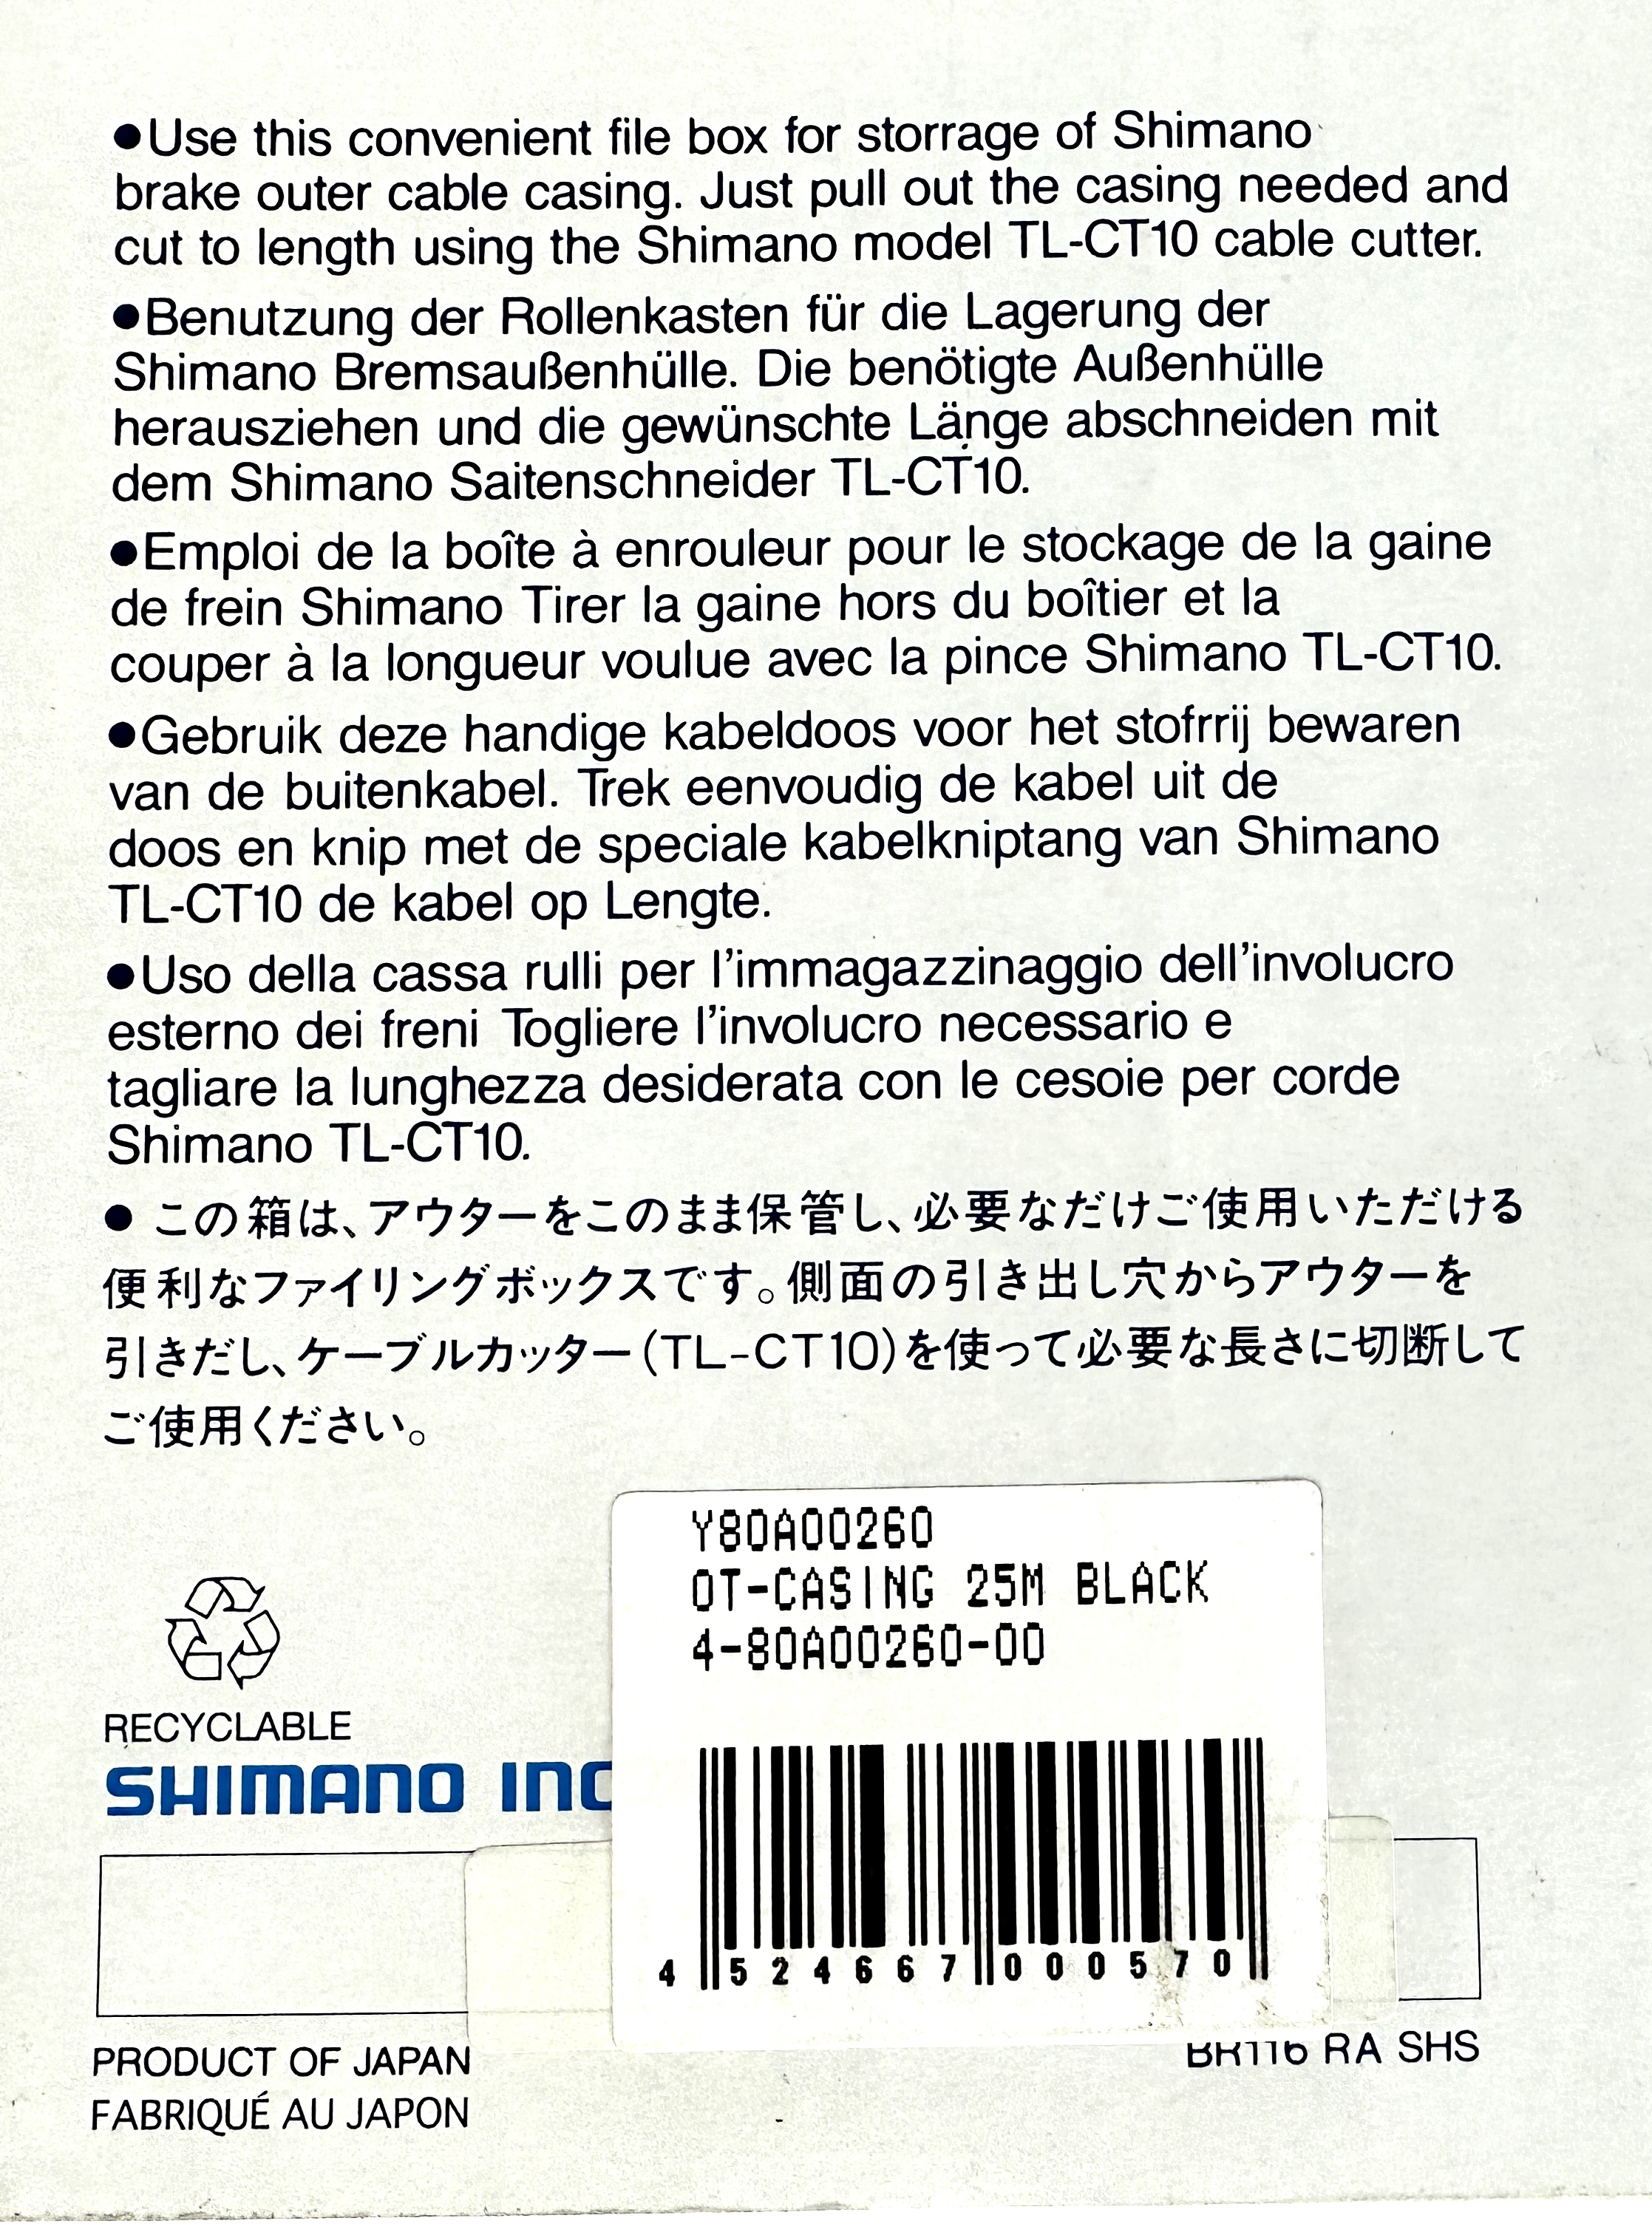 Shimano Japan brake outer cable black 25 m 6 mm  Made in Japan